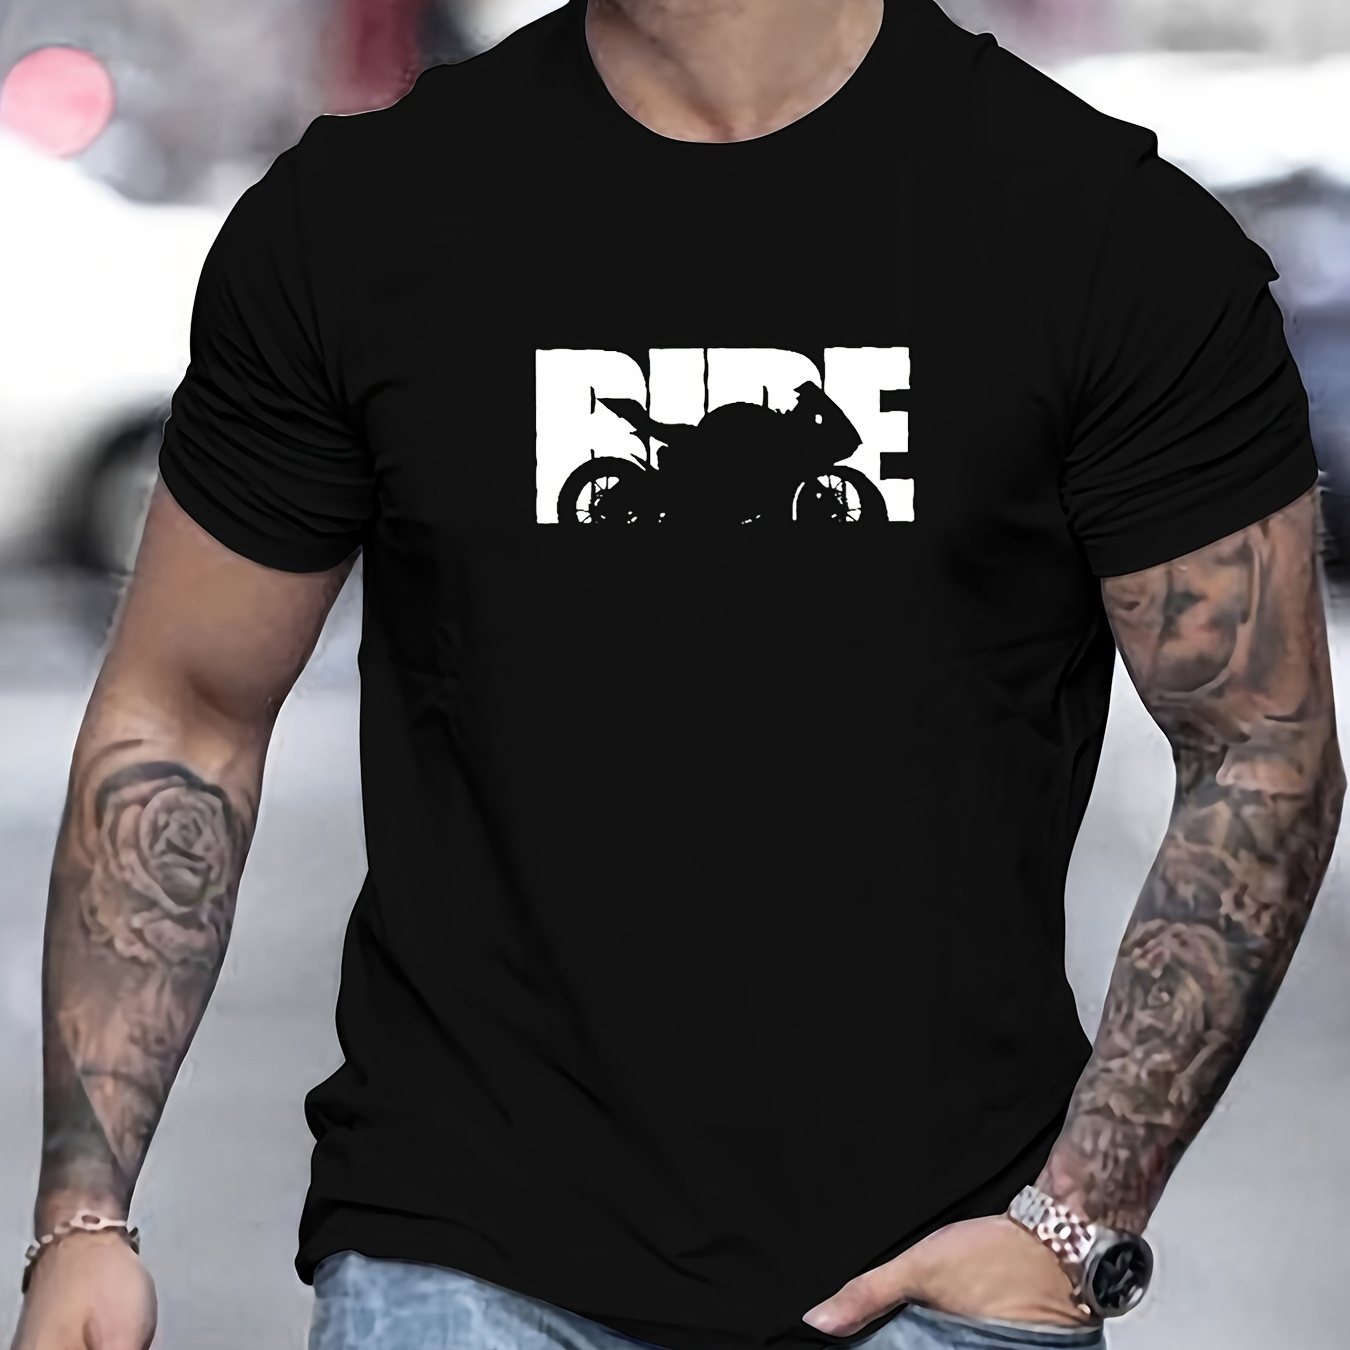 

Men's Ride Graphic Tee - Casual Cotton Crew Neck T-shirt, Short Sleeve, Summer Fashion Mens T Shirts Shirts For Men